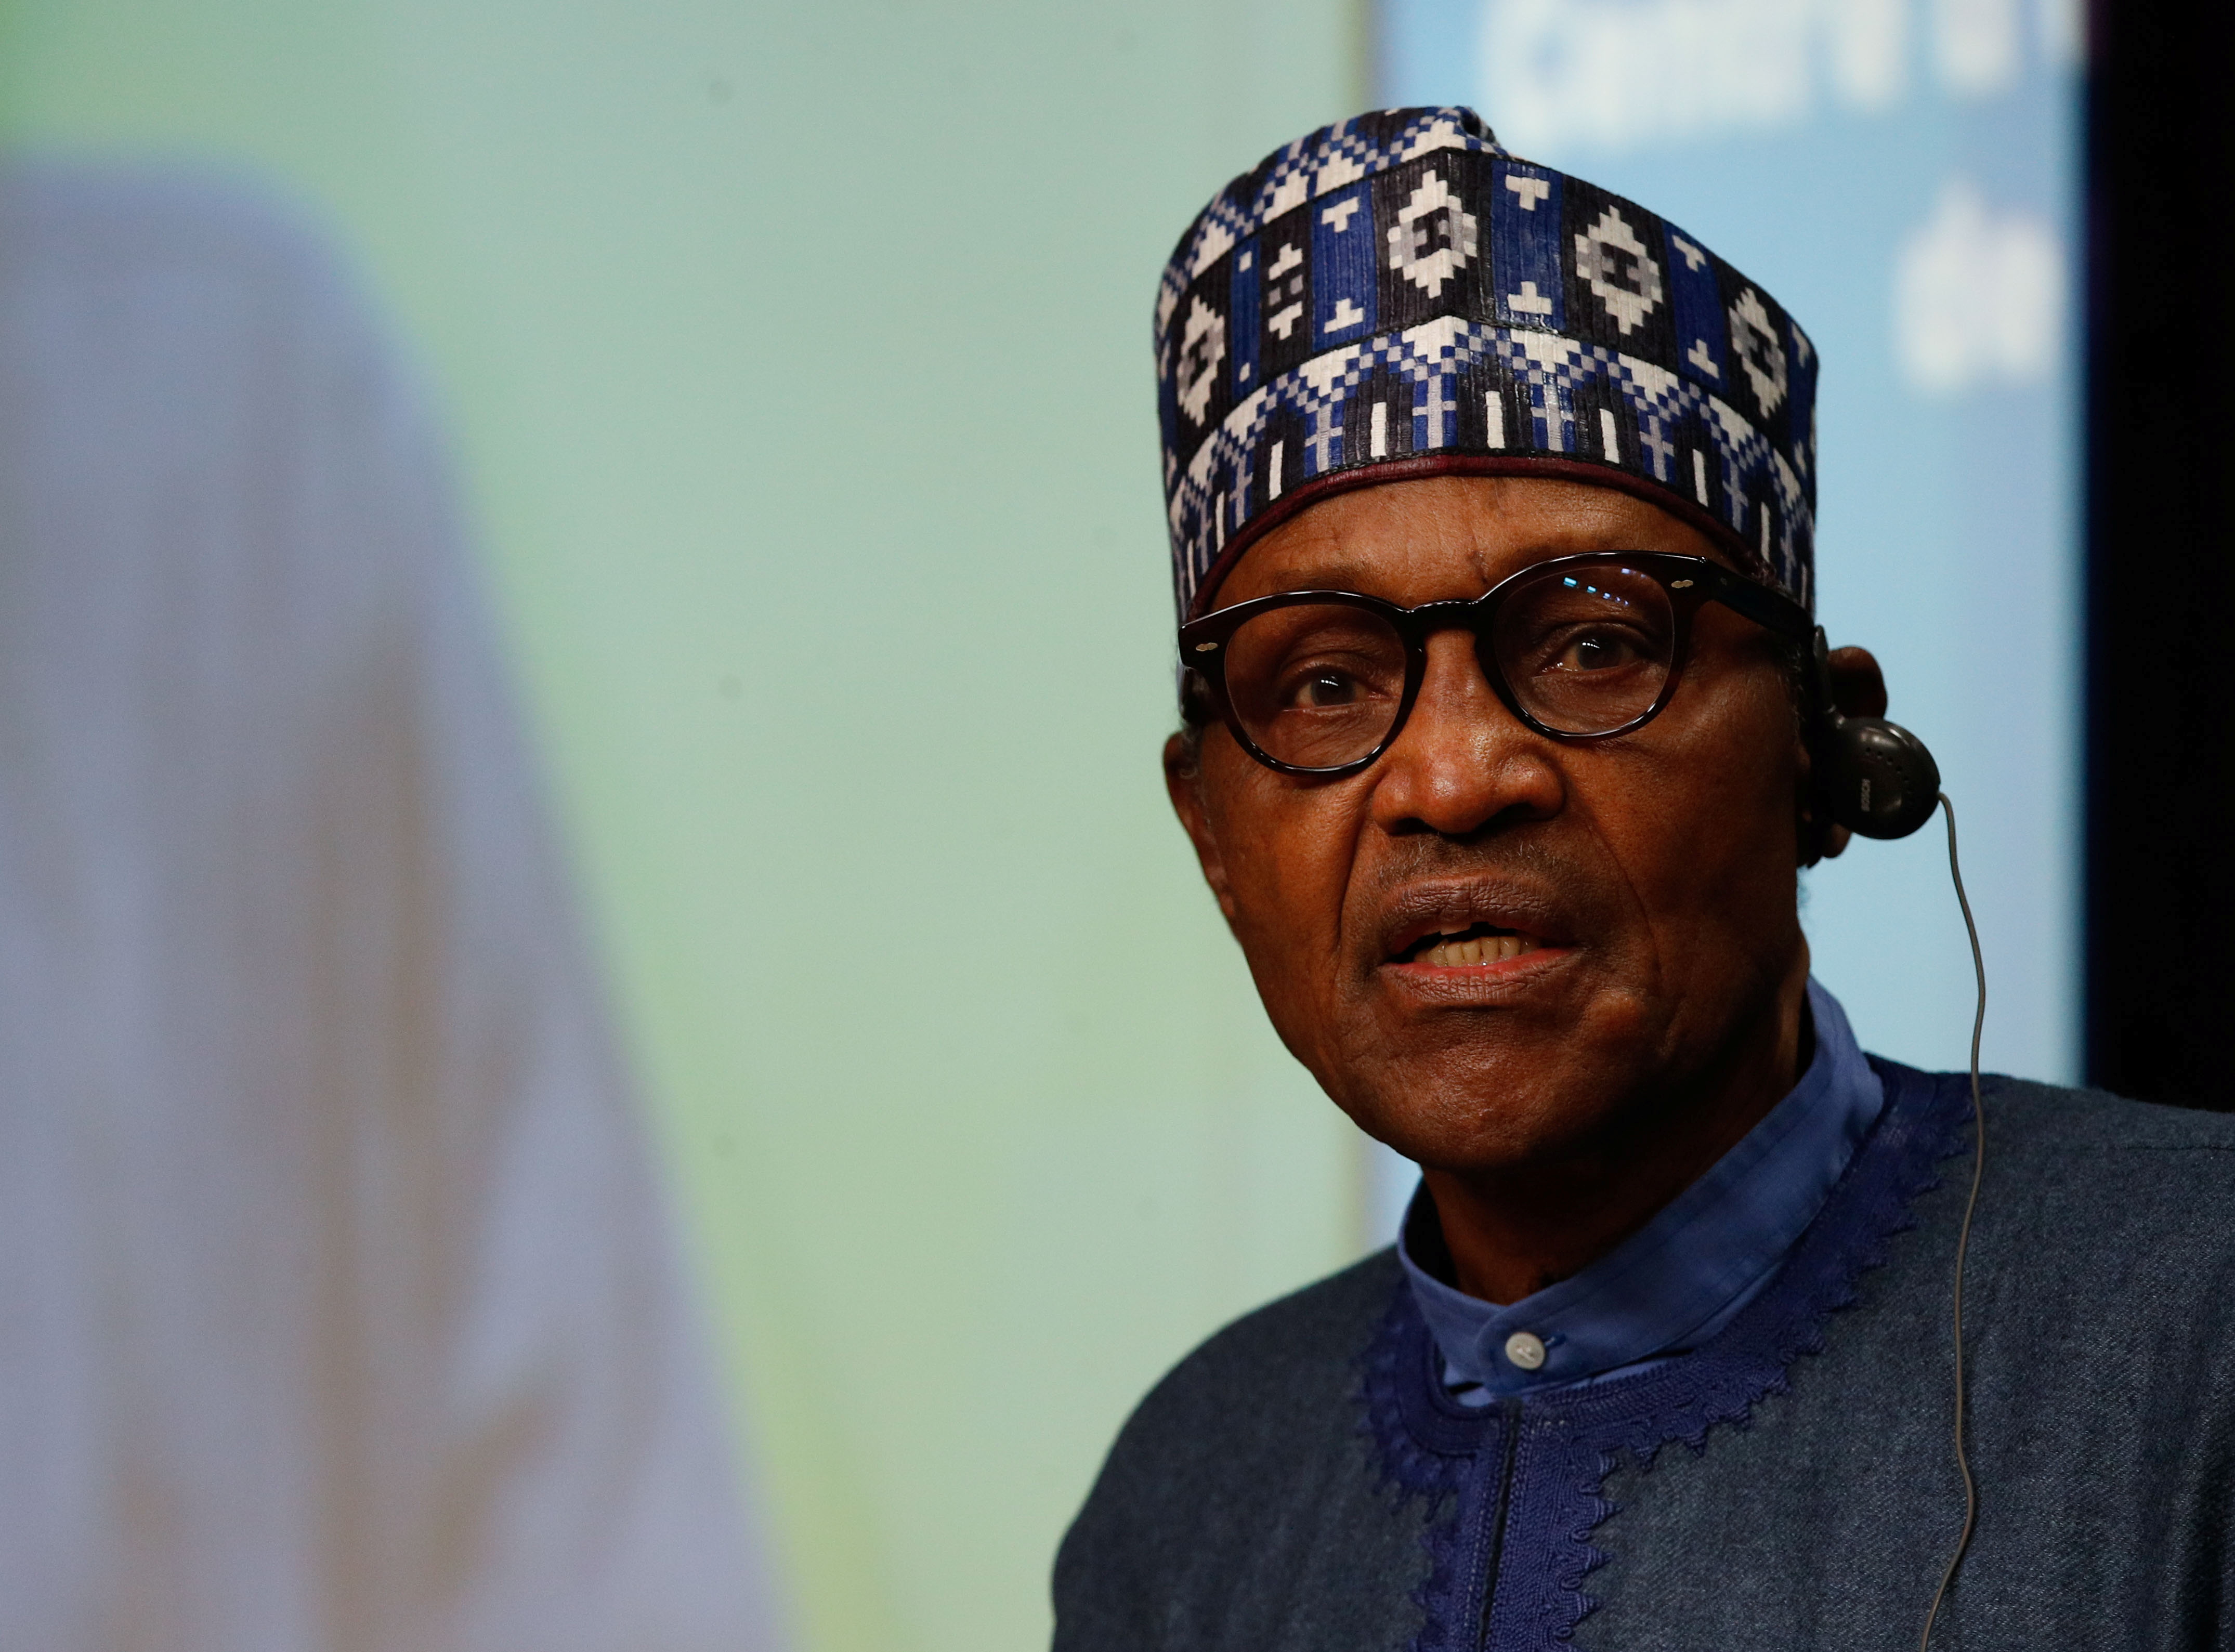 Nigeria Train Kidnappers Using Victims as Human shields -president